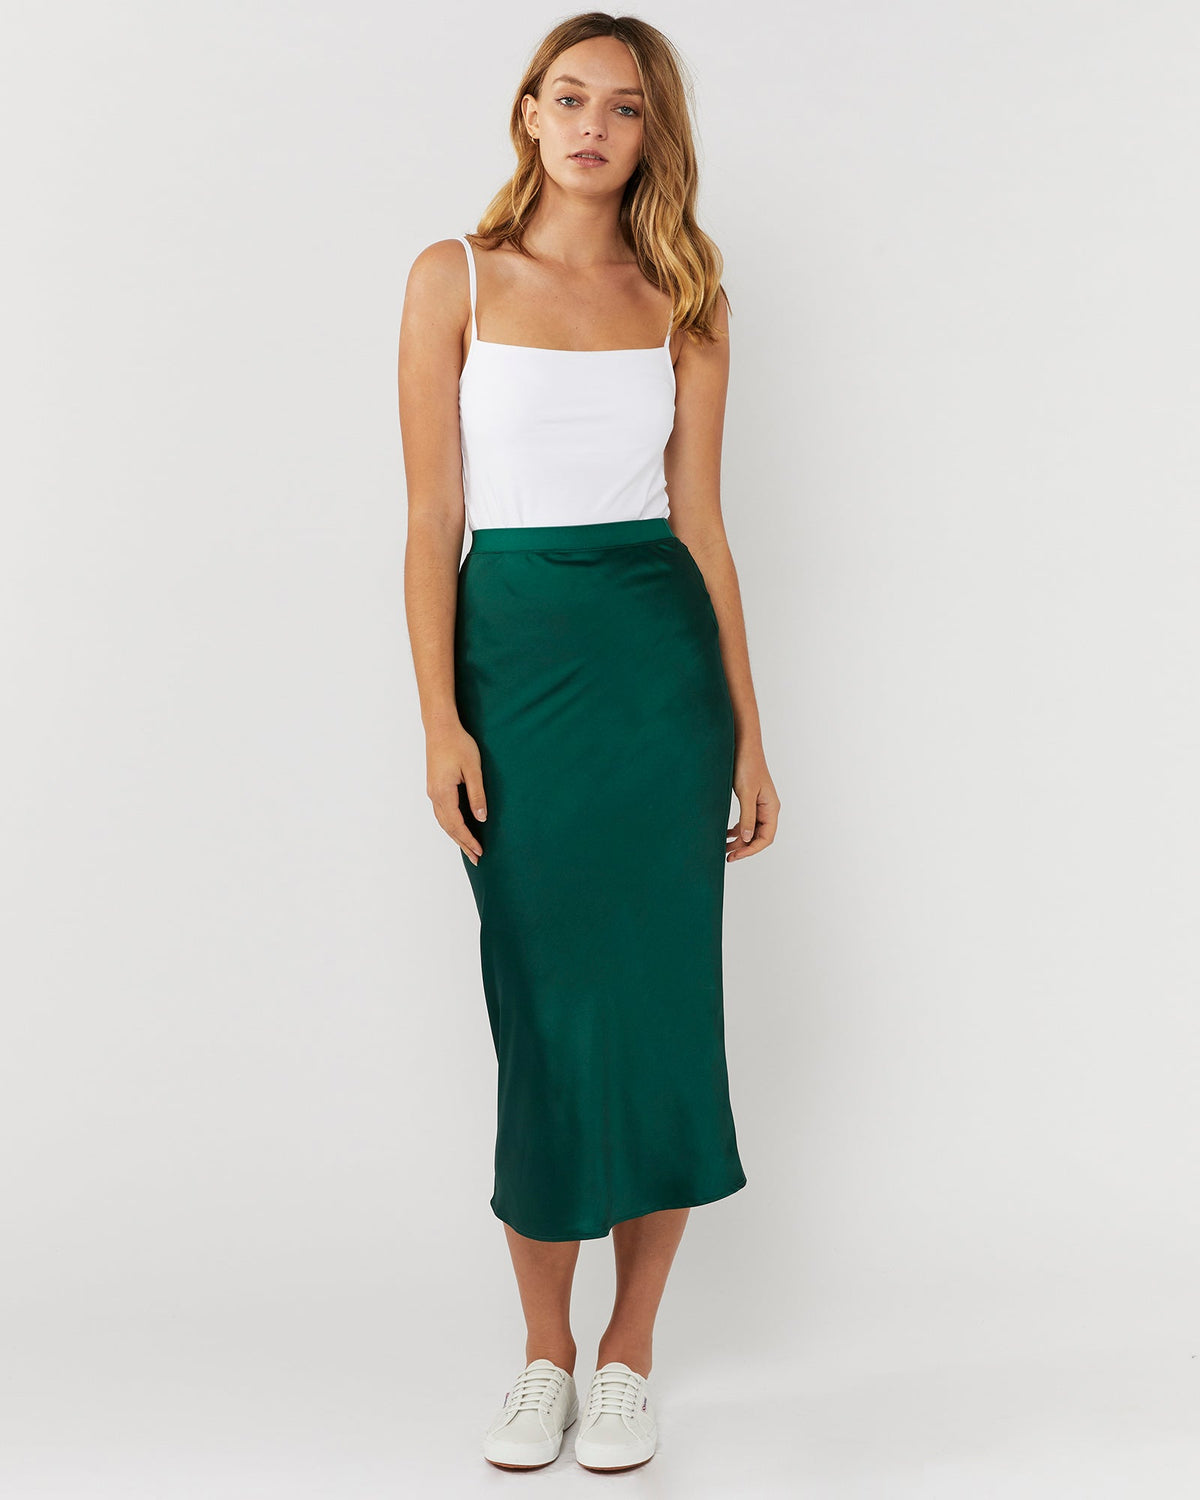 ALL THESE YEARS SATIN SKIRT - FOREST GREEN